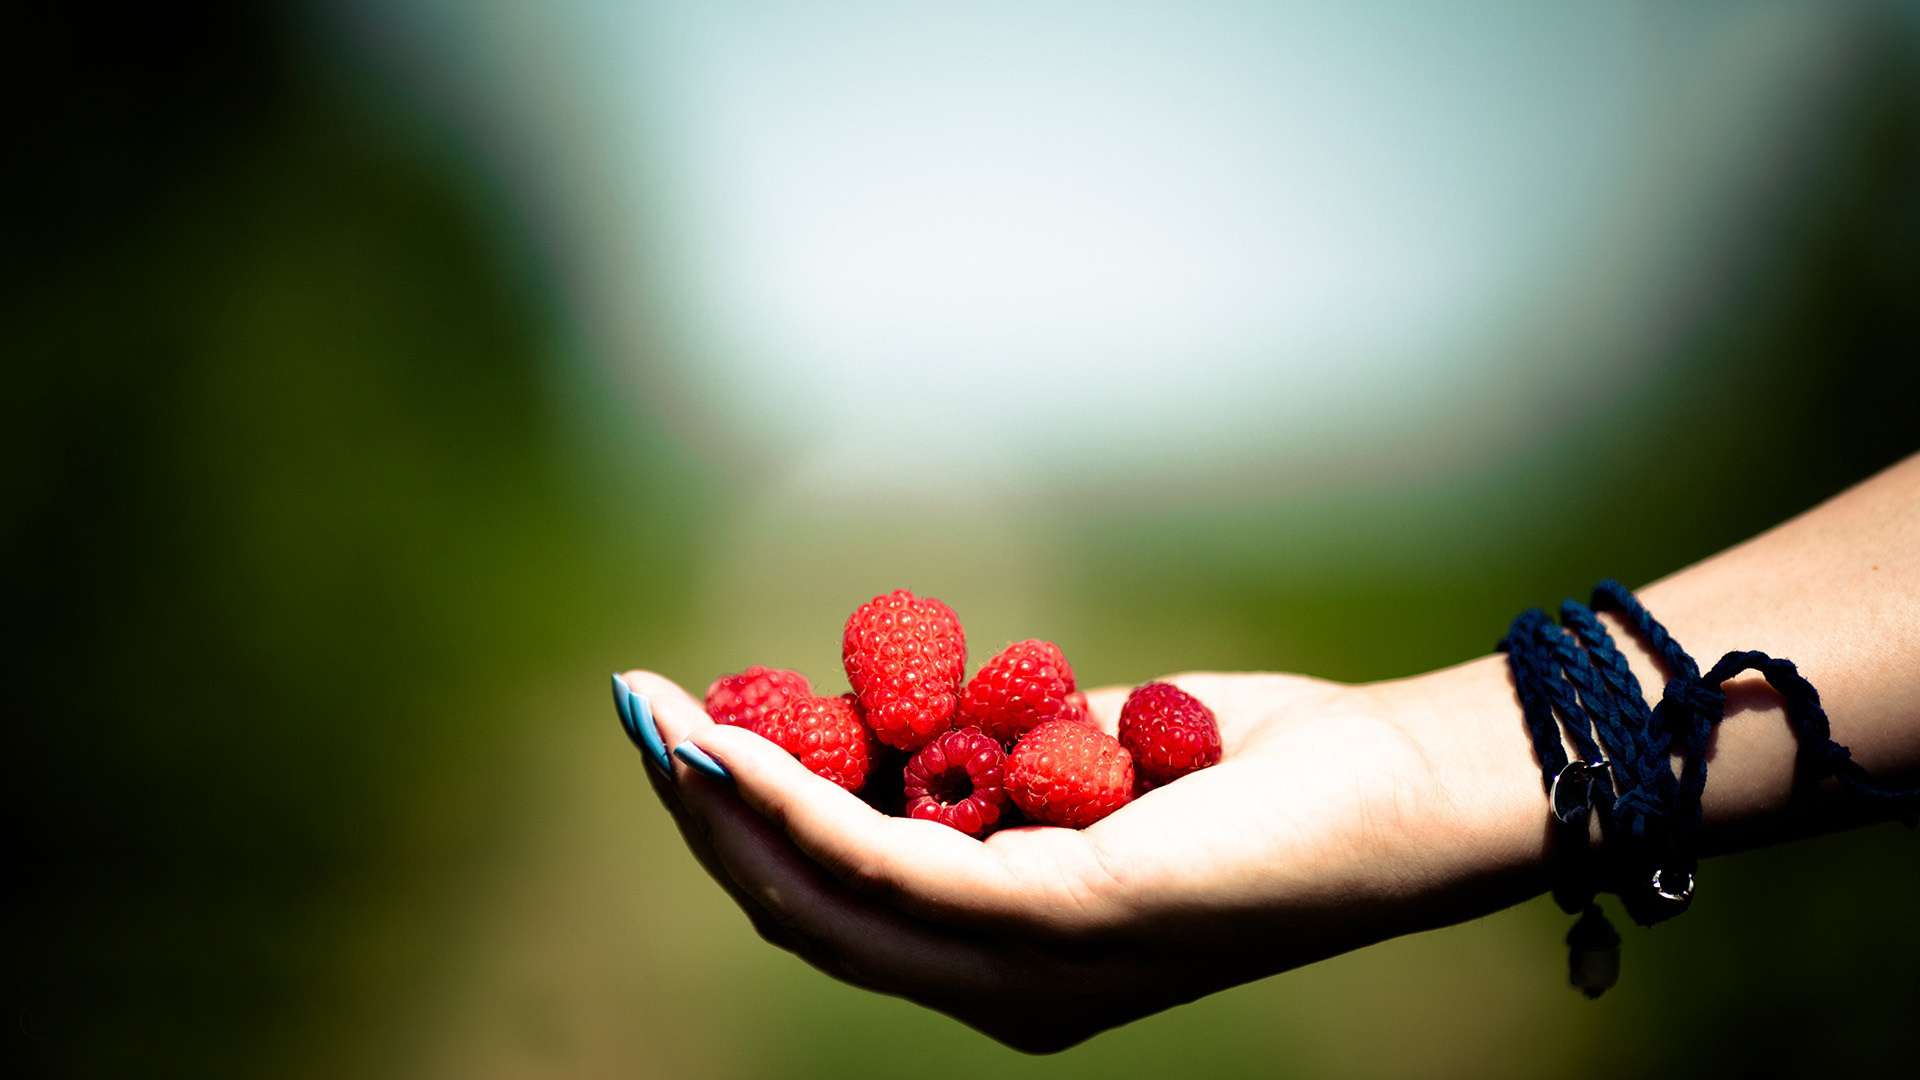 mood off wallpaper hd,red,berry,fruit,hand,strawberry